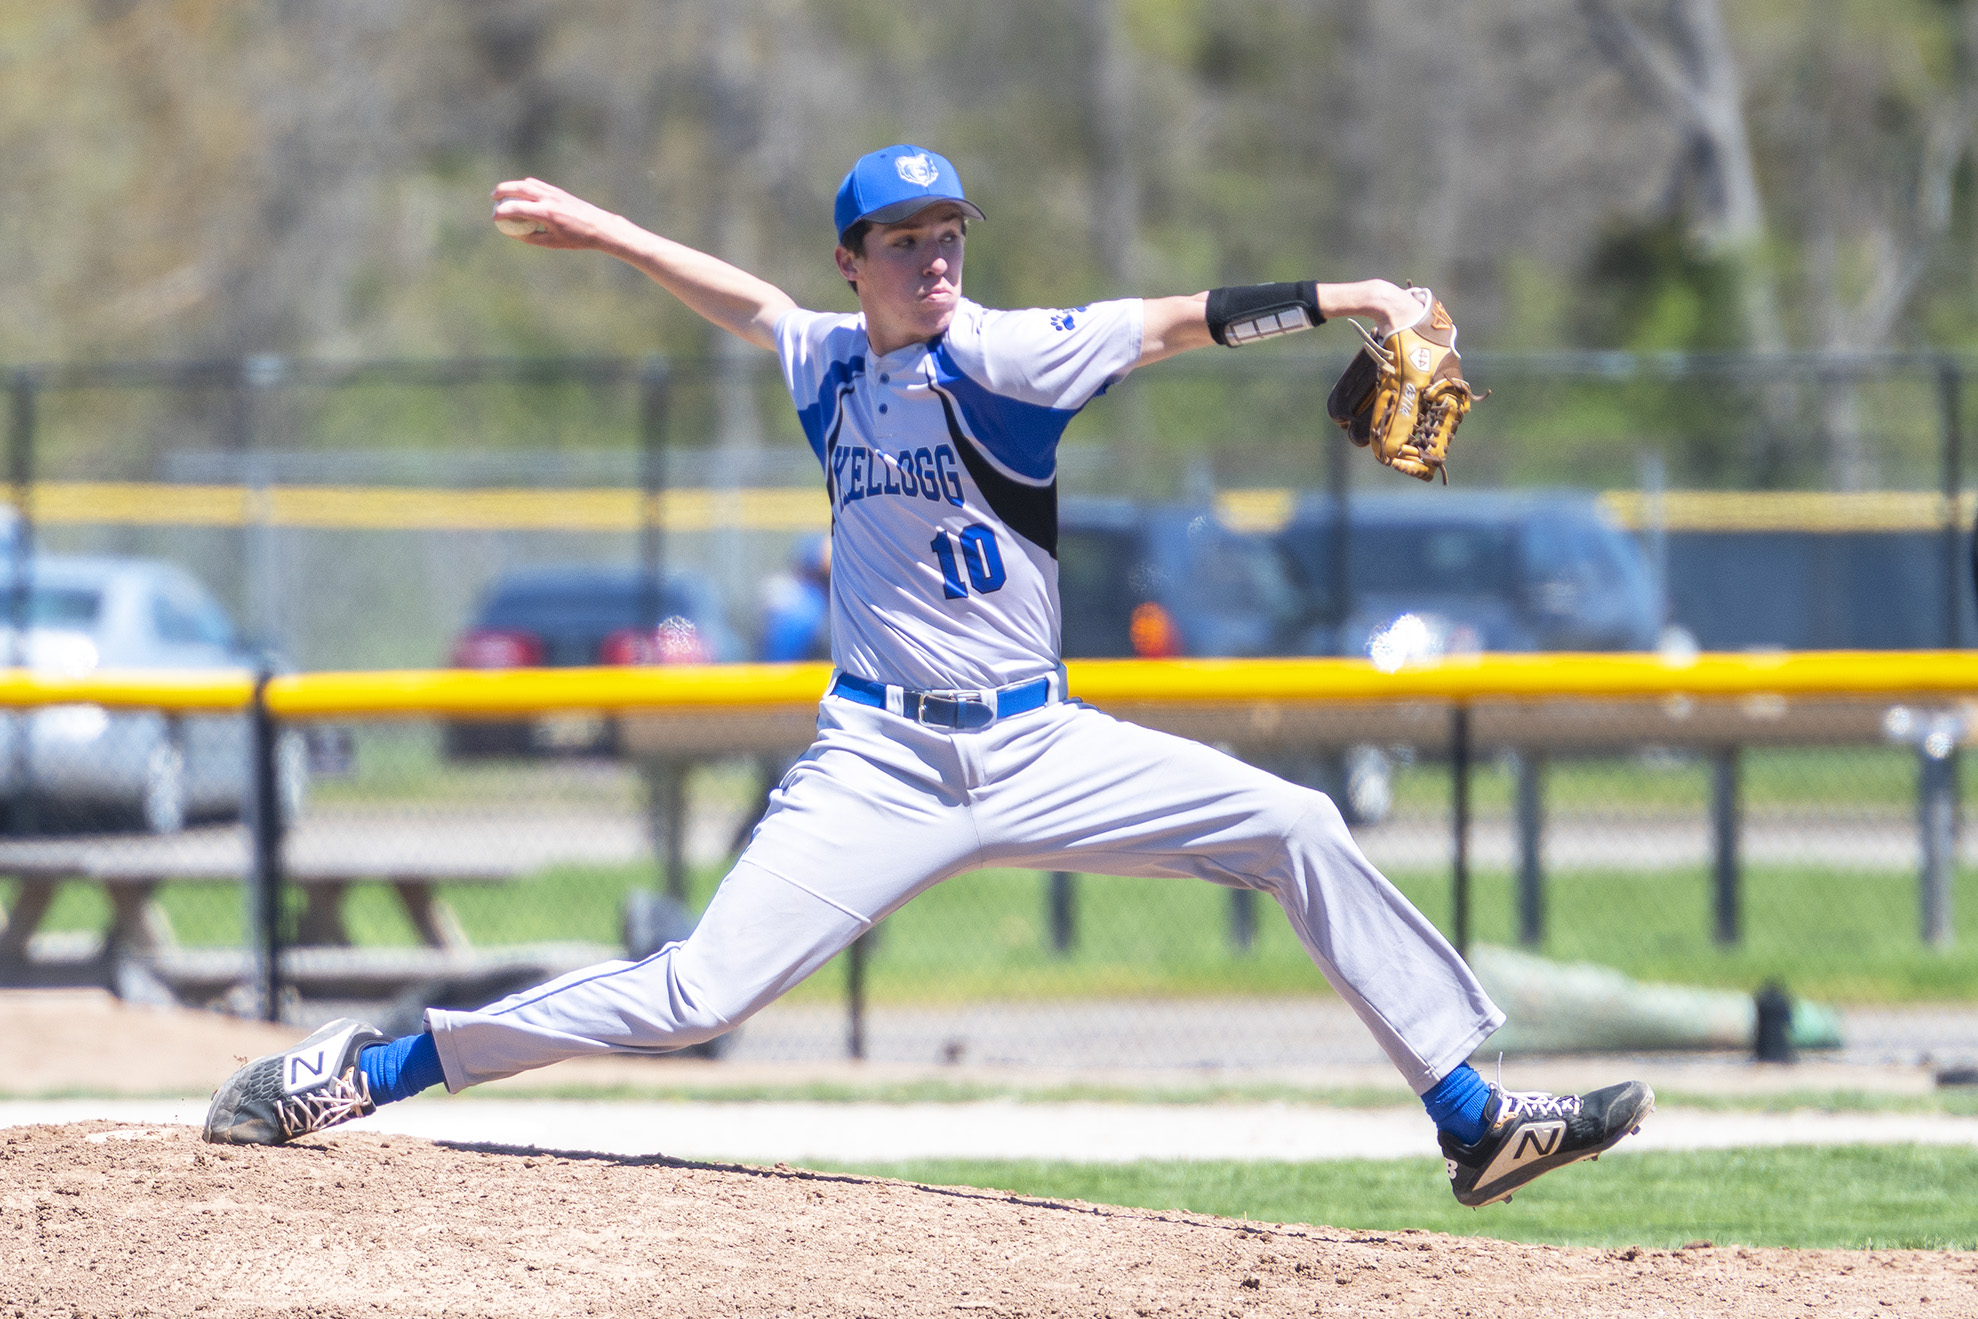 Pitcher Zach Marshall pitches during a game.